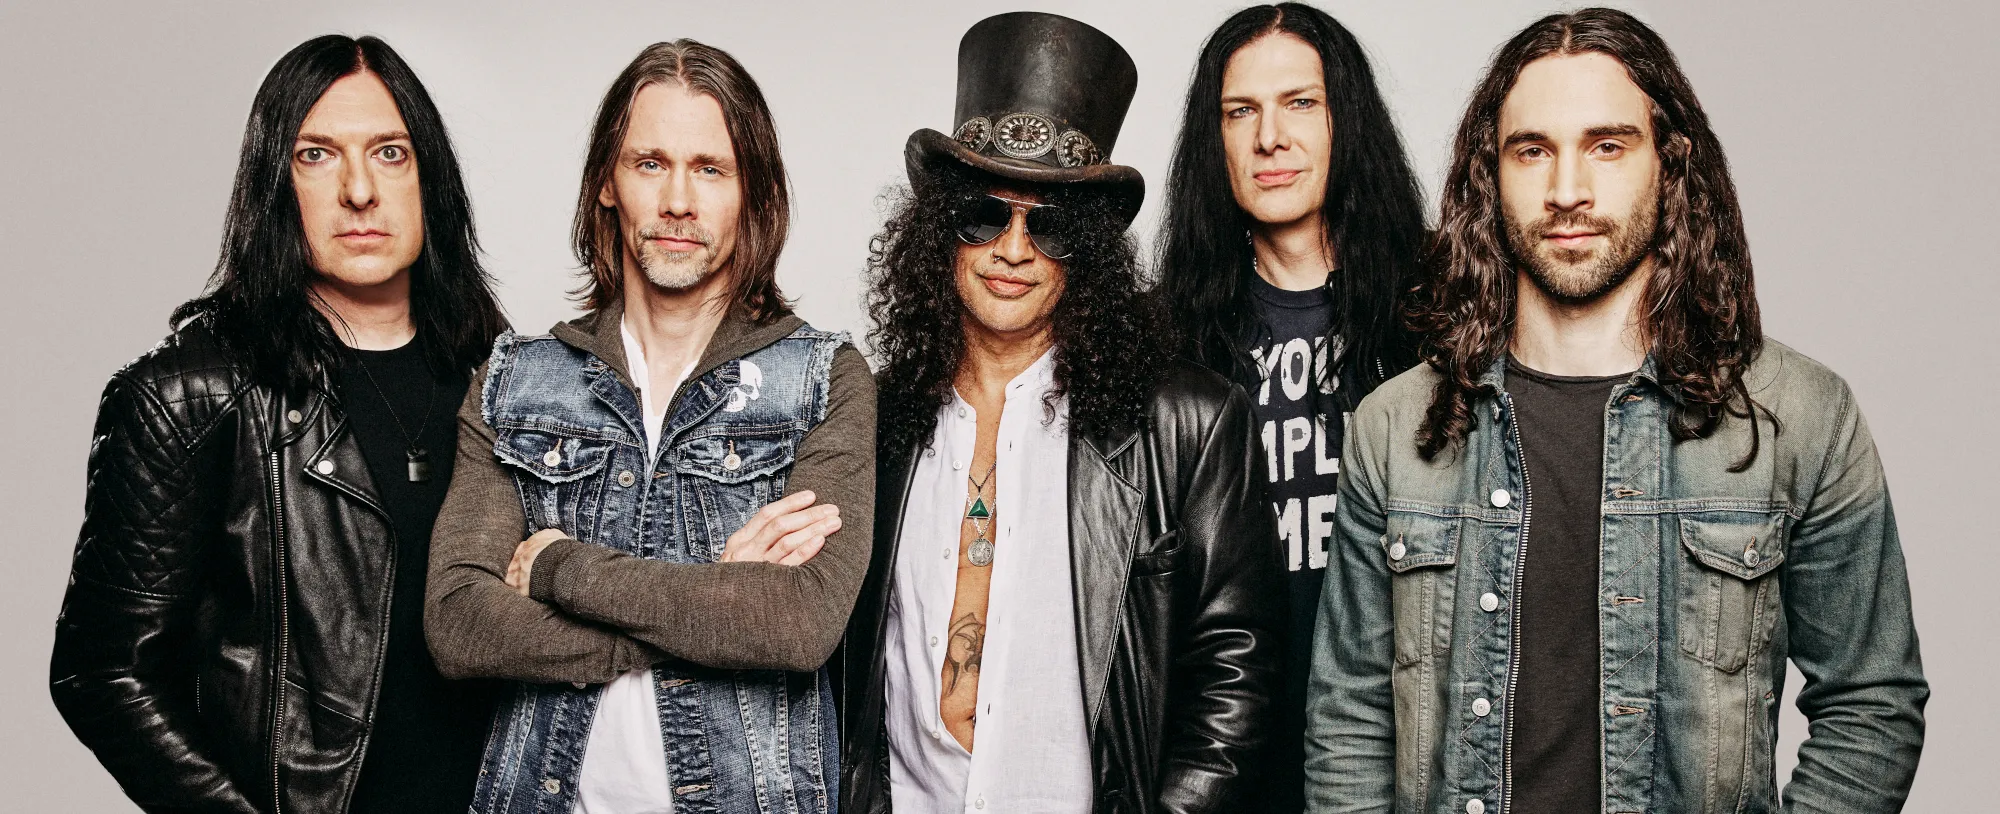 Slash Ft. Myles Kennedy & The Conspirators Release Debut Single, “The River Is Rising”